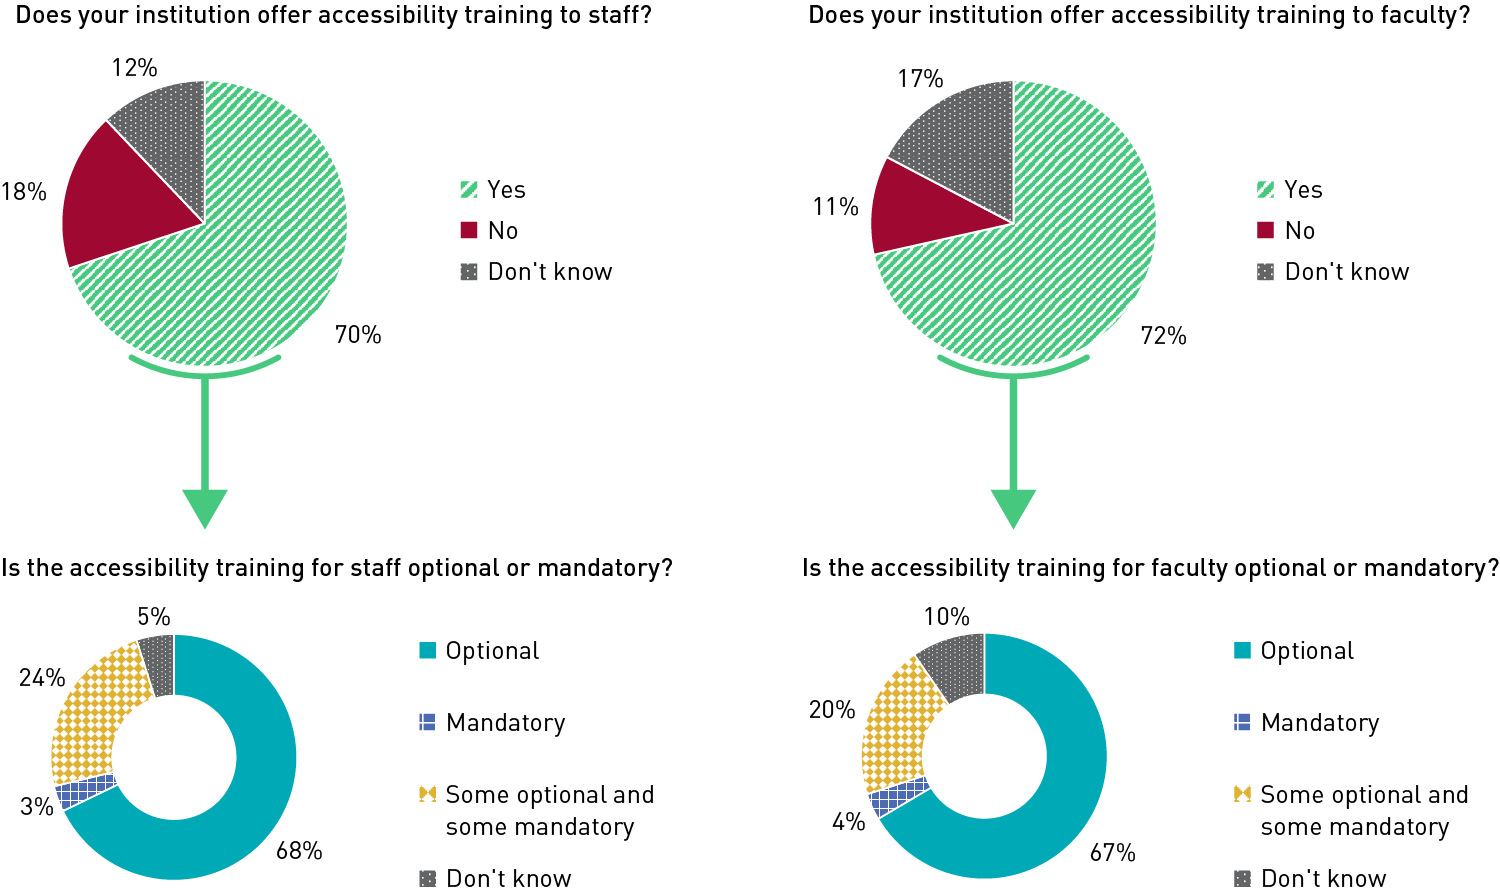 A series of pie charts showing the availability and enforcement of staff and faculty accessibility training: For staff training, 12% of respondents said they don't know if their institution offers staff training, 18% said their institution does not offer staff training, and 70% said their institution does offer staff training. Of those who responded "yes," 68% said staff training is optional, 24% said staff training is a mix of optional and mandatory, 3% said staff training is mandatory, and 5% said they don't know. For faculty training, 17% of respondents said they don't know if their institution offers faculty training, 11% said their institution does not offer faculty training, and 72% say their institution does offer faculty training. Of those who responded "yes," 67% said faculty training is optional, 20% said faculty training is a mix of optional and mandatory, 4% said faculty training is mandatory, and 10% said they don't know.